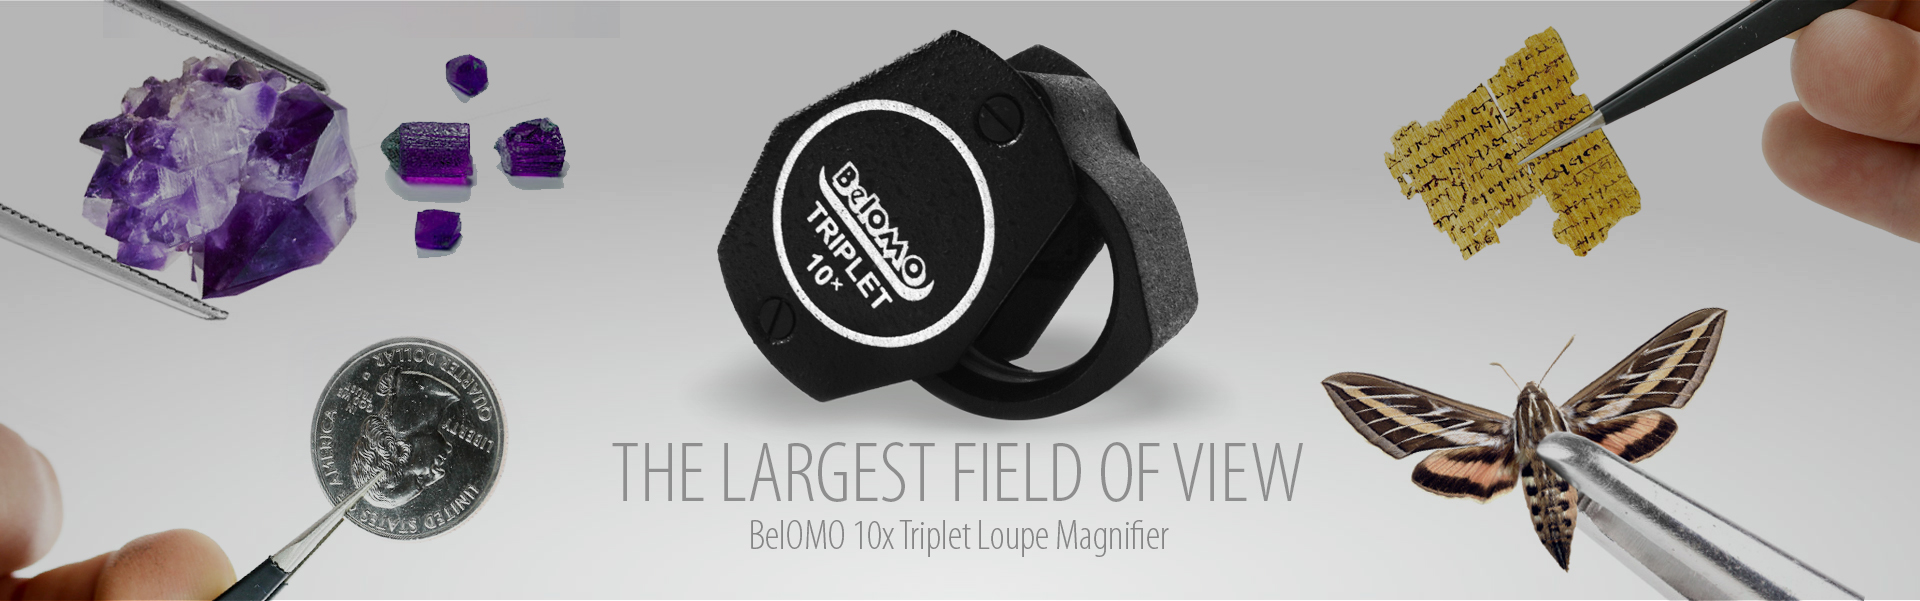 BelOMO 20x Quadruplet Loupe Magnifier with Removable Deluxe BelOMO Logo Lanyard 